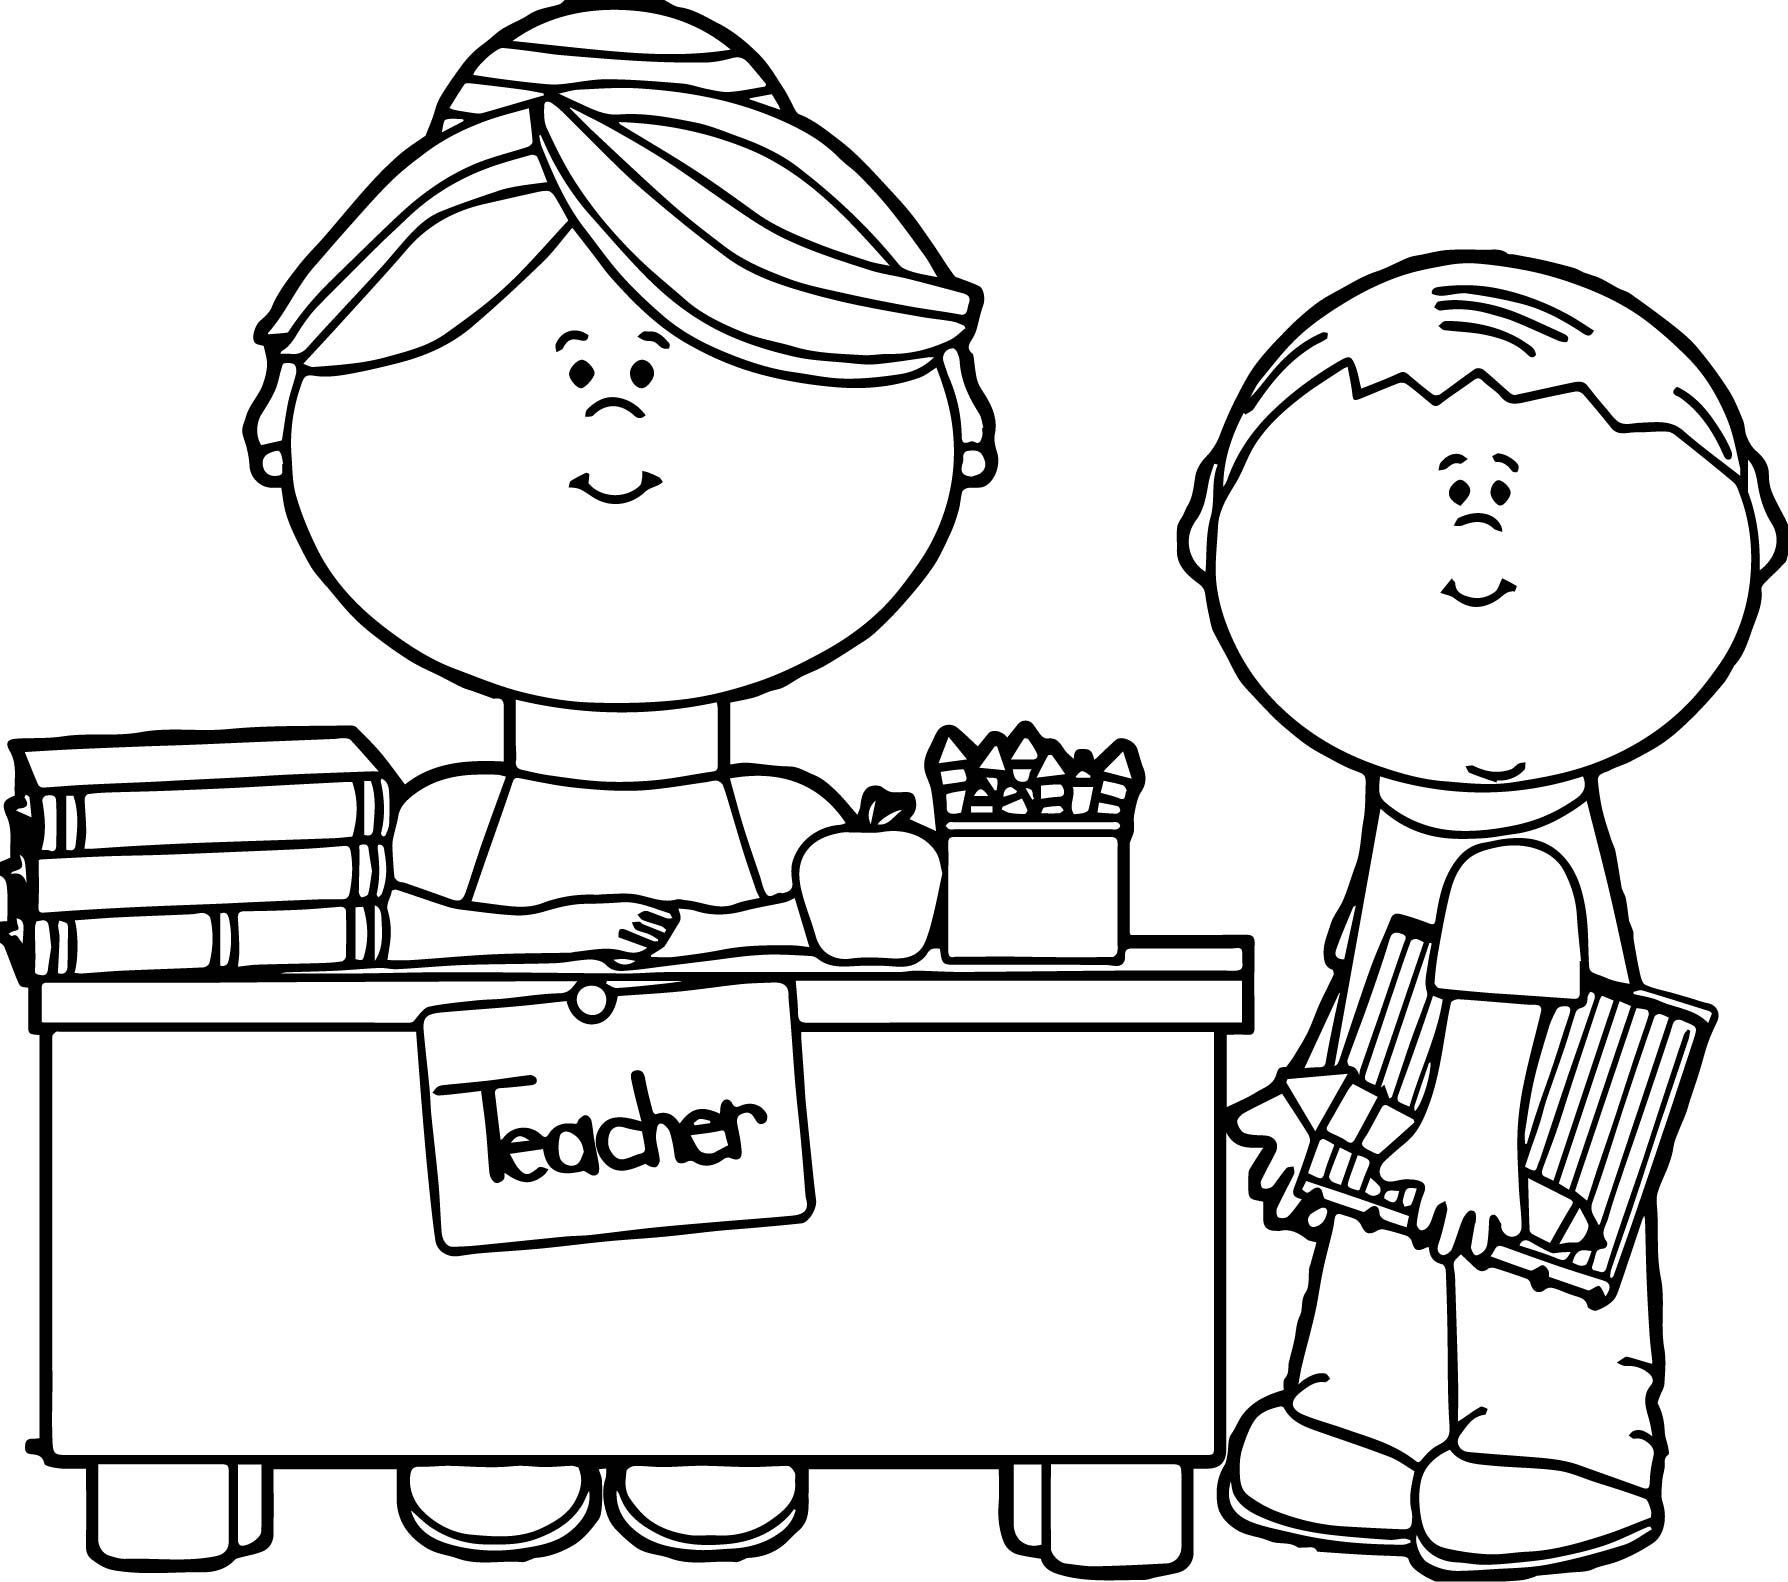  Coloring Pages For Teachers 8